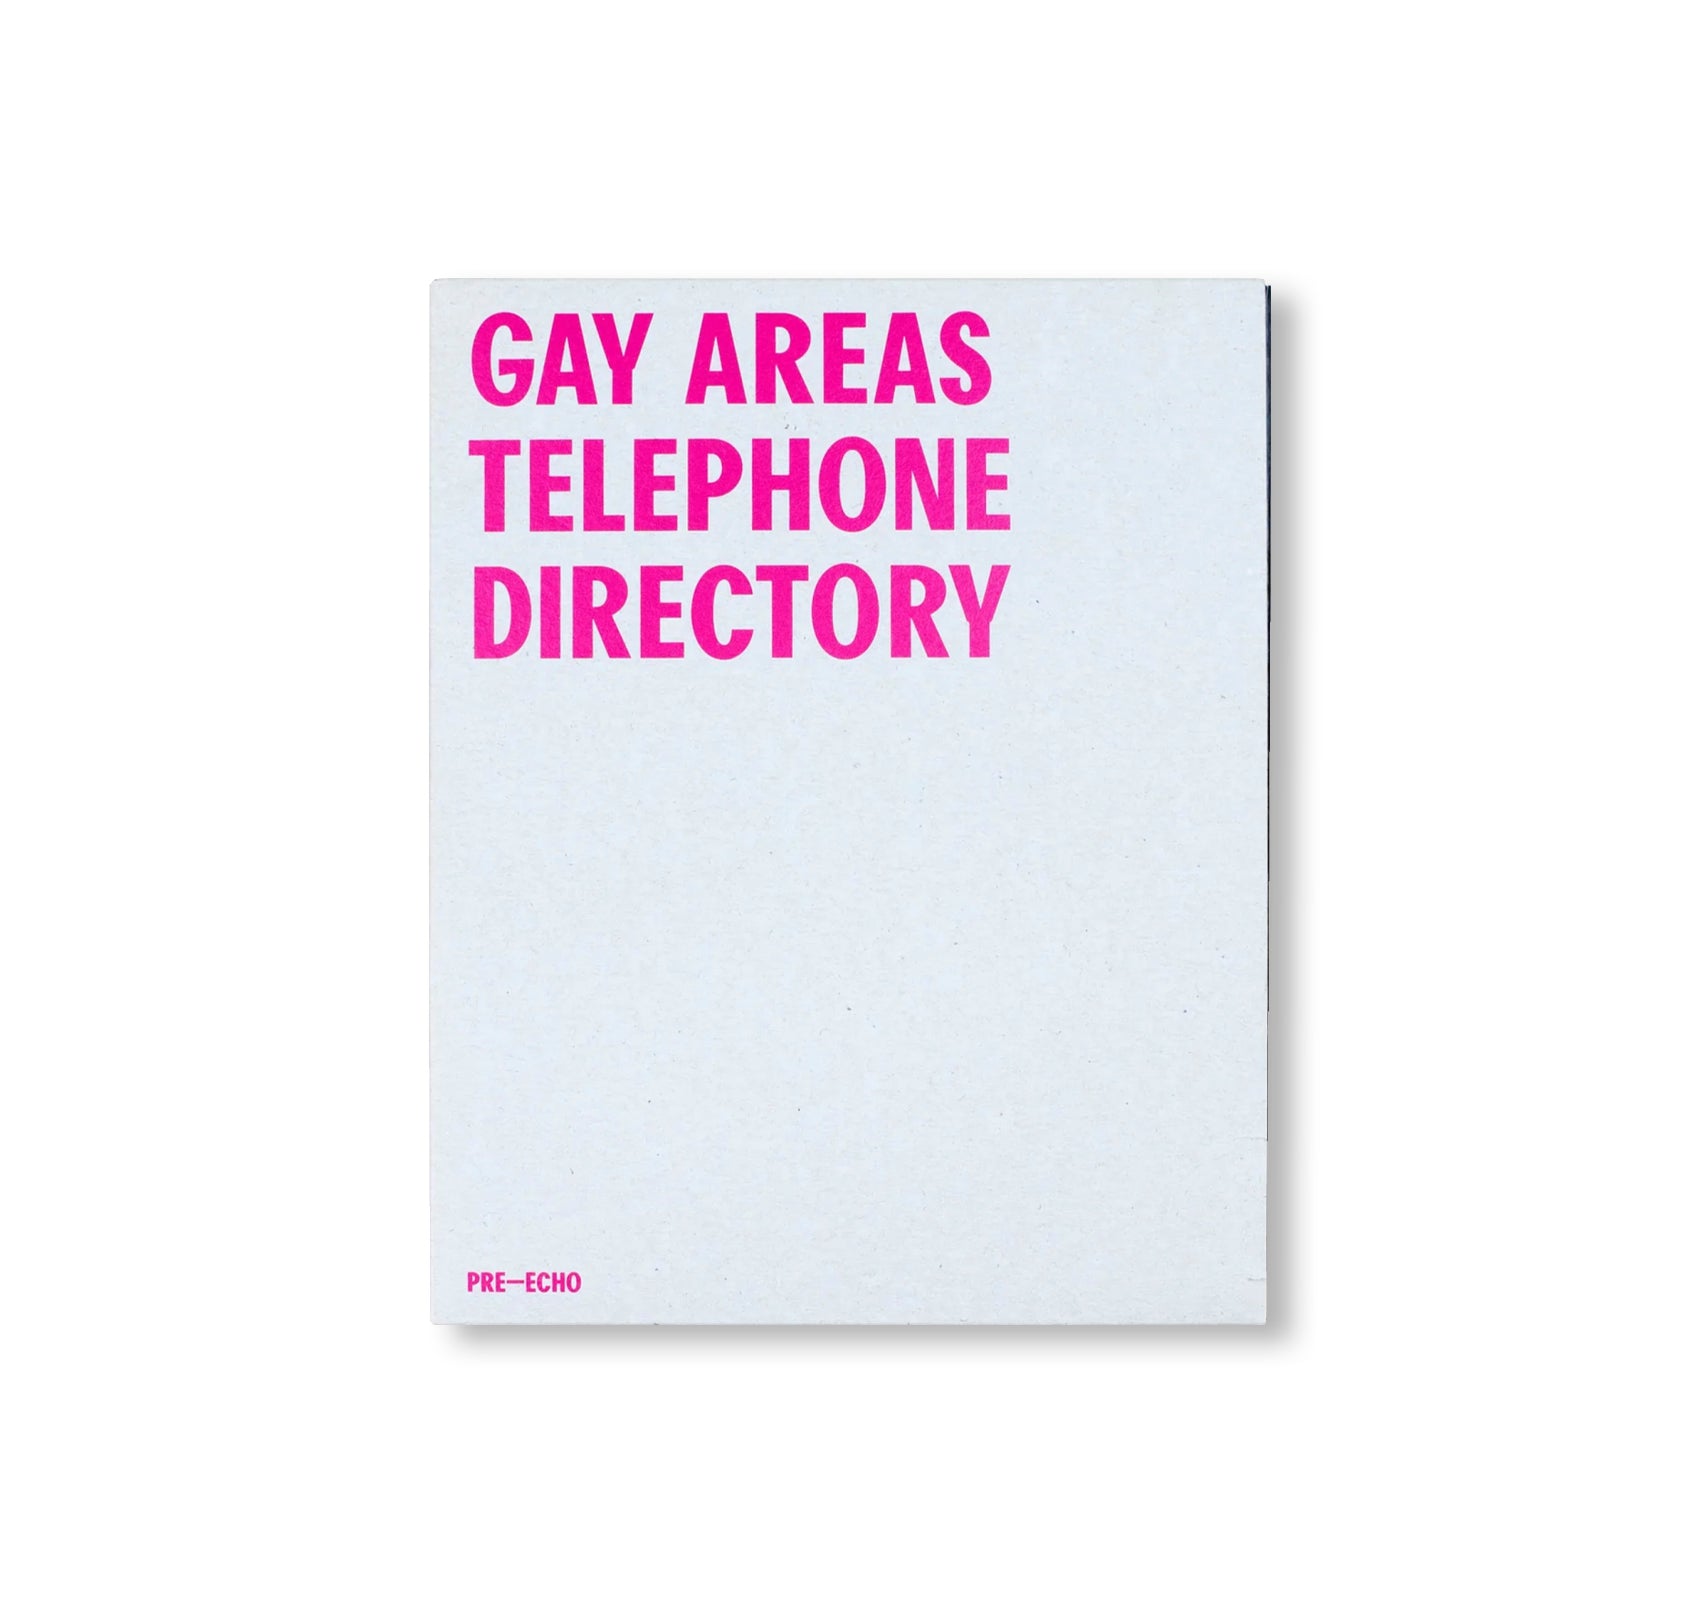 GAY AREAS TELEPHONE DIRECTORY